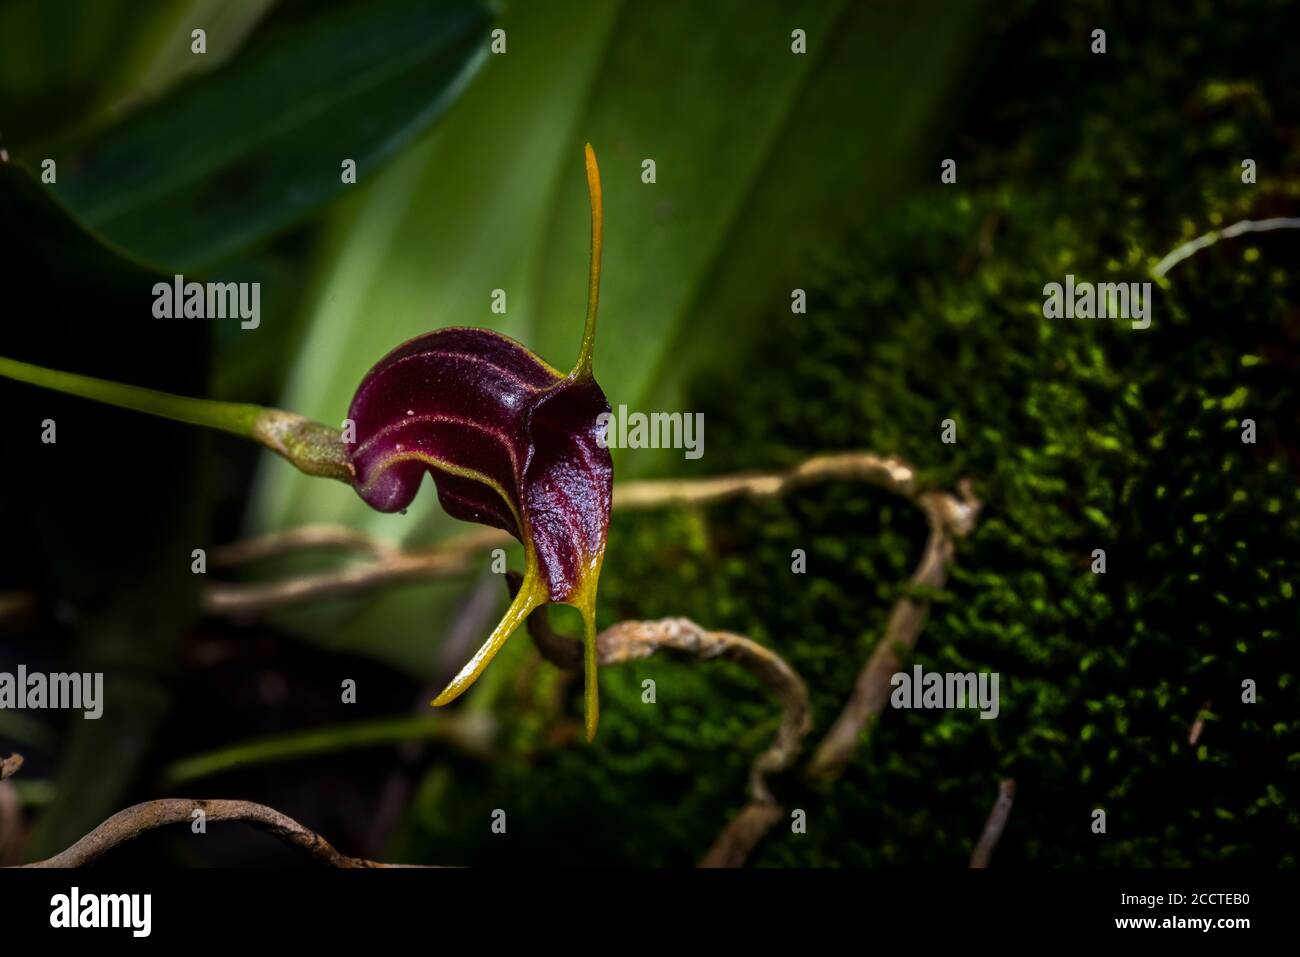 Rare orchid of purple color image taken in the cloud forest of Panama Stock Photo